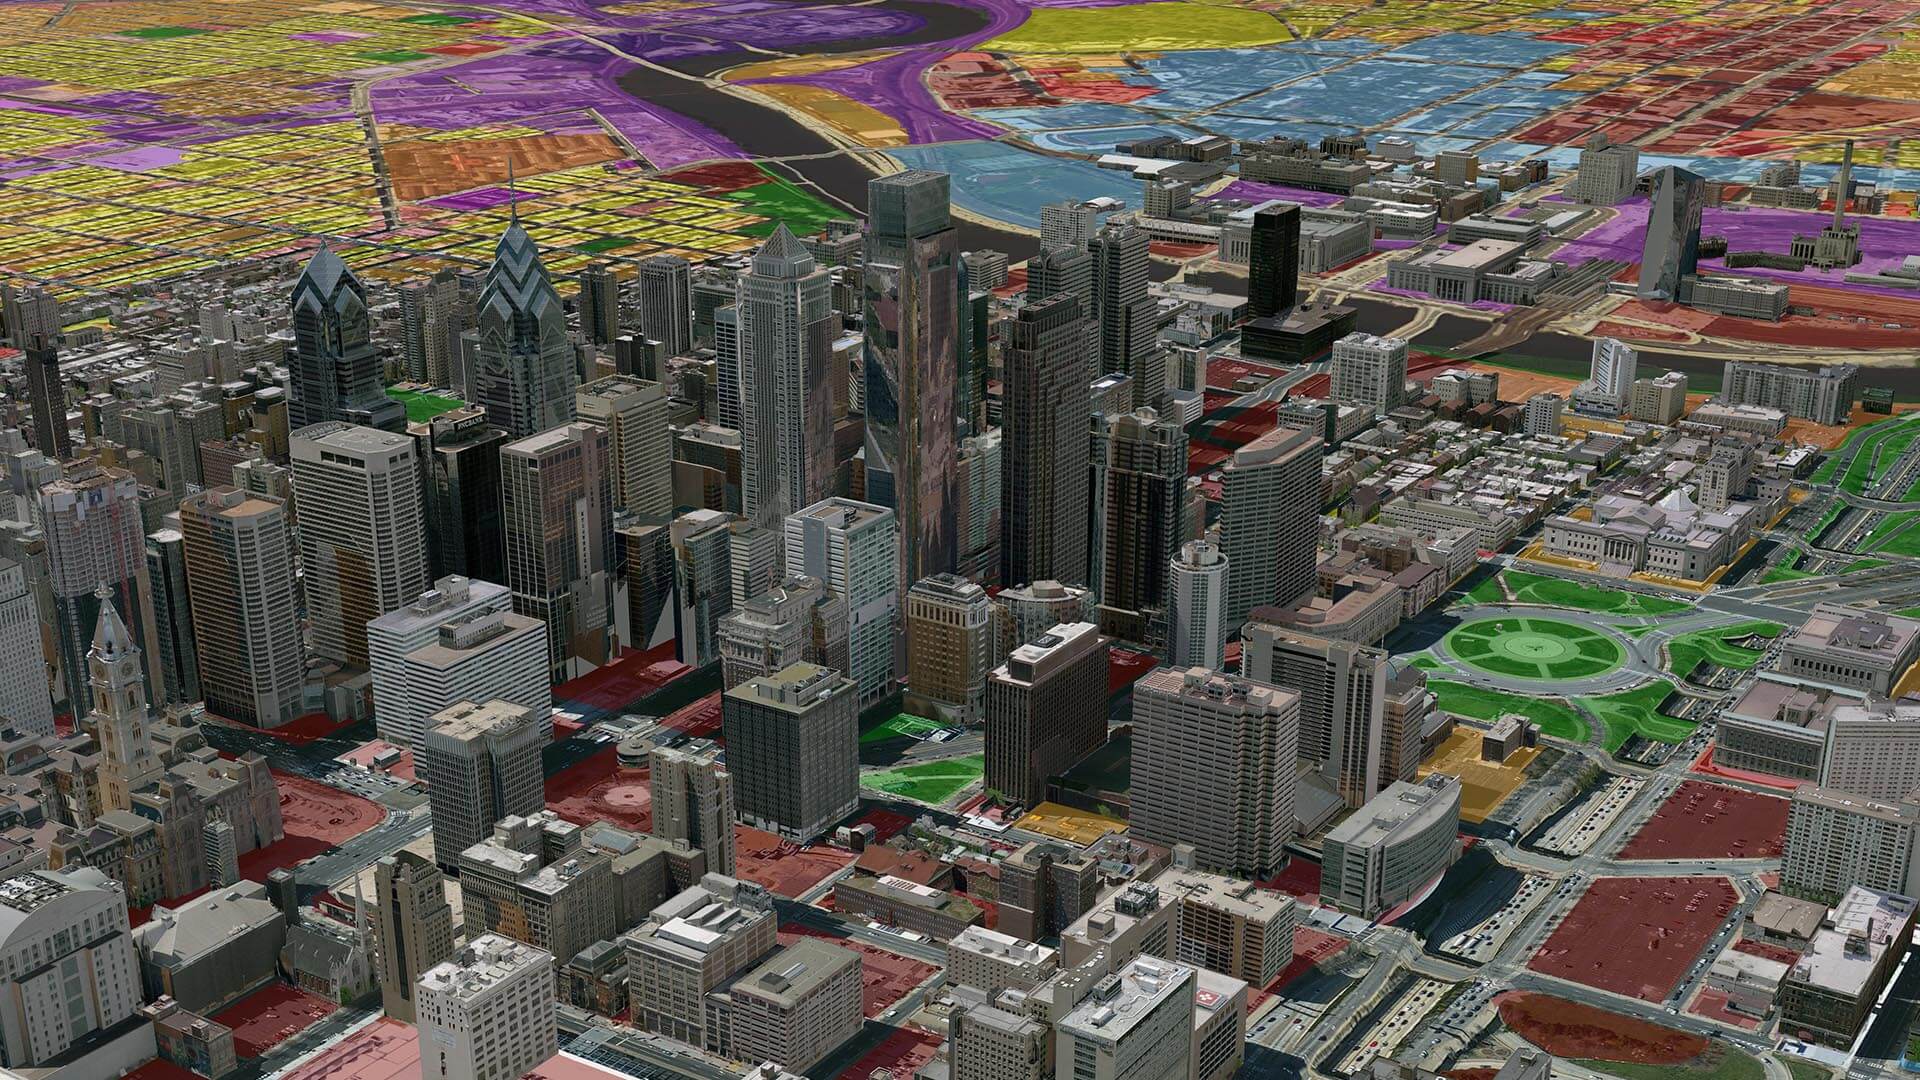 This 3D cityscape shows the interplay of geography and business